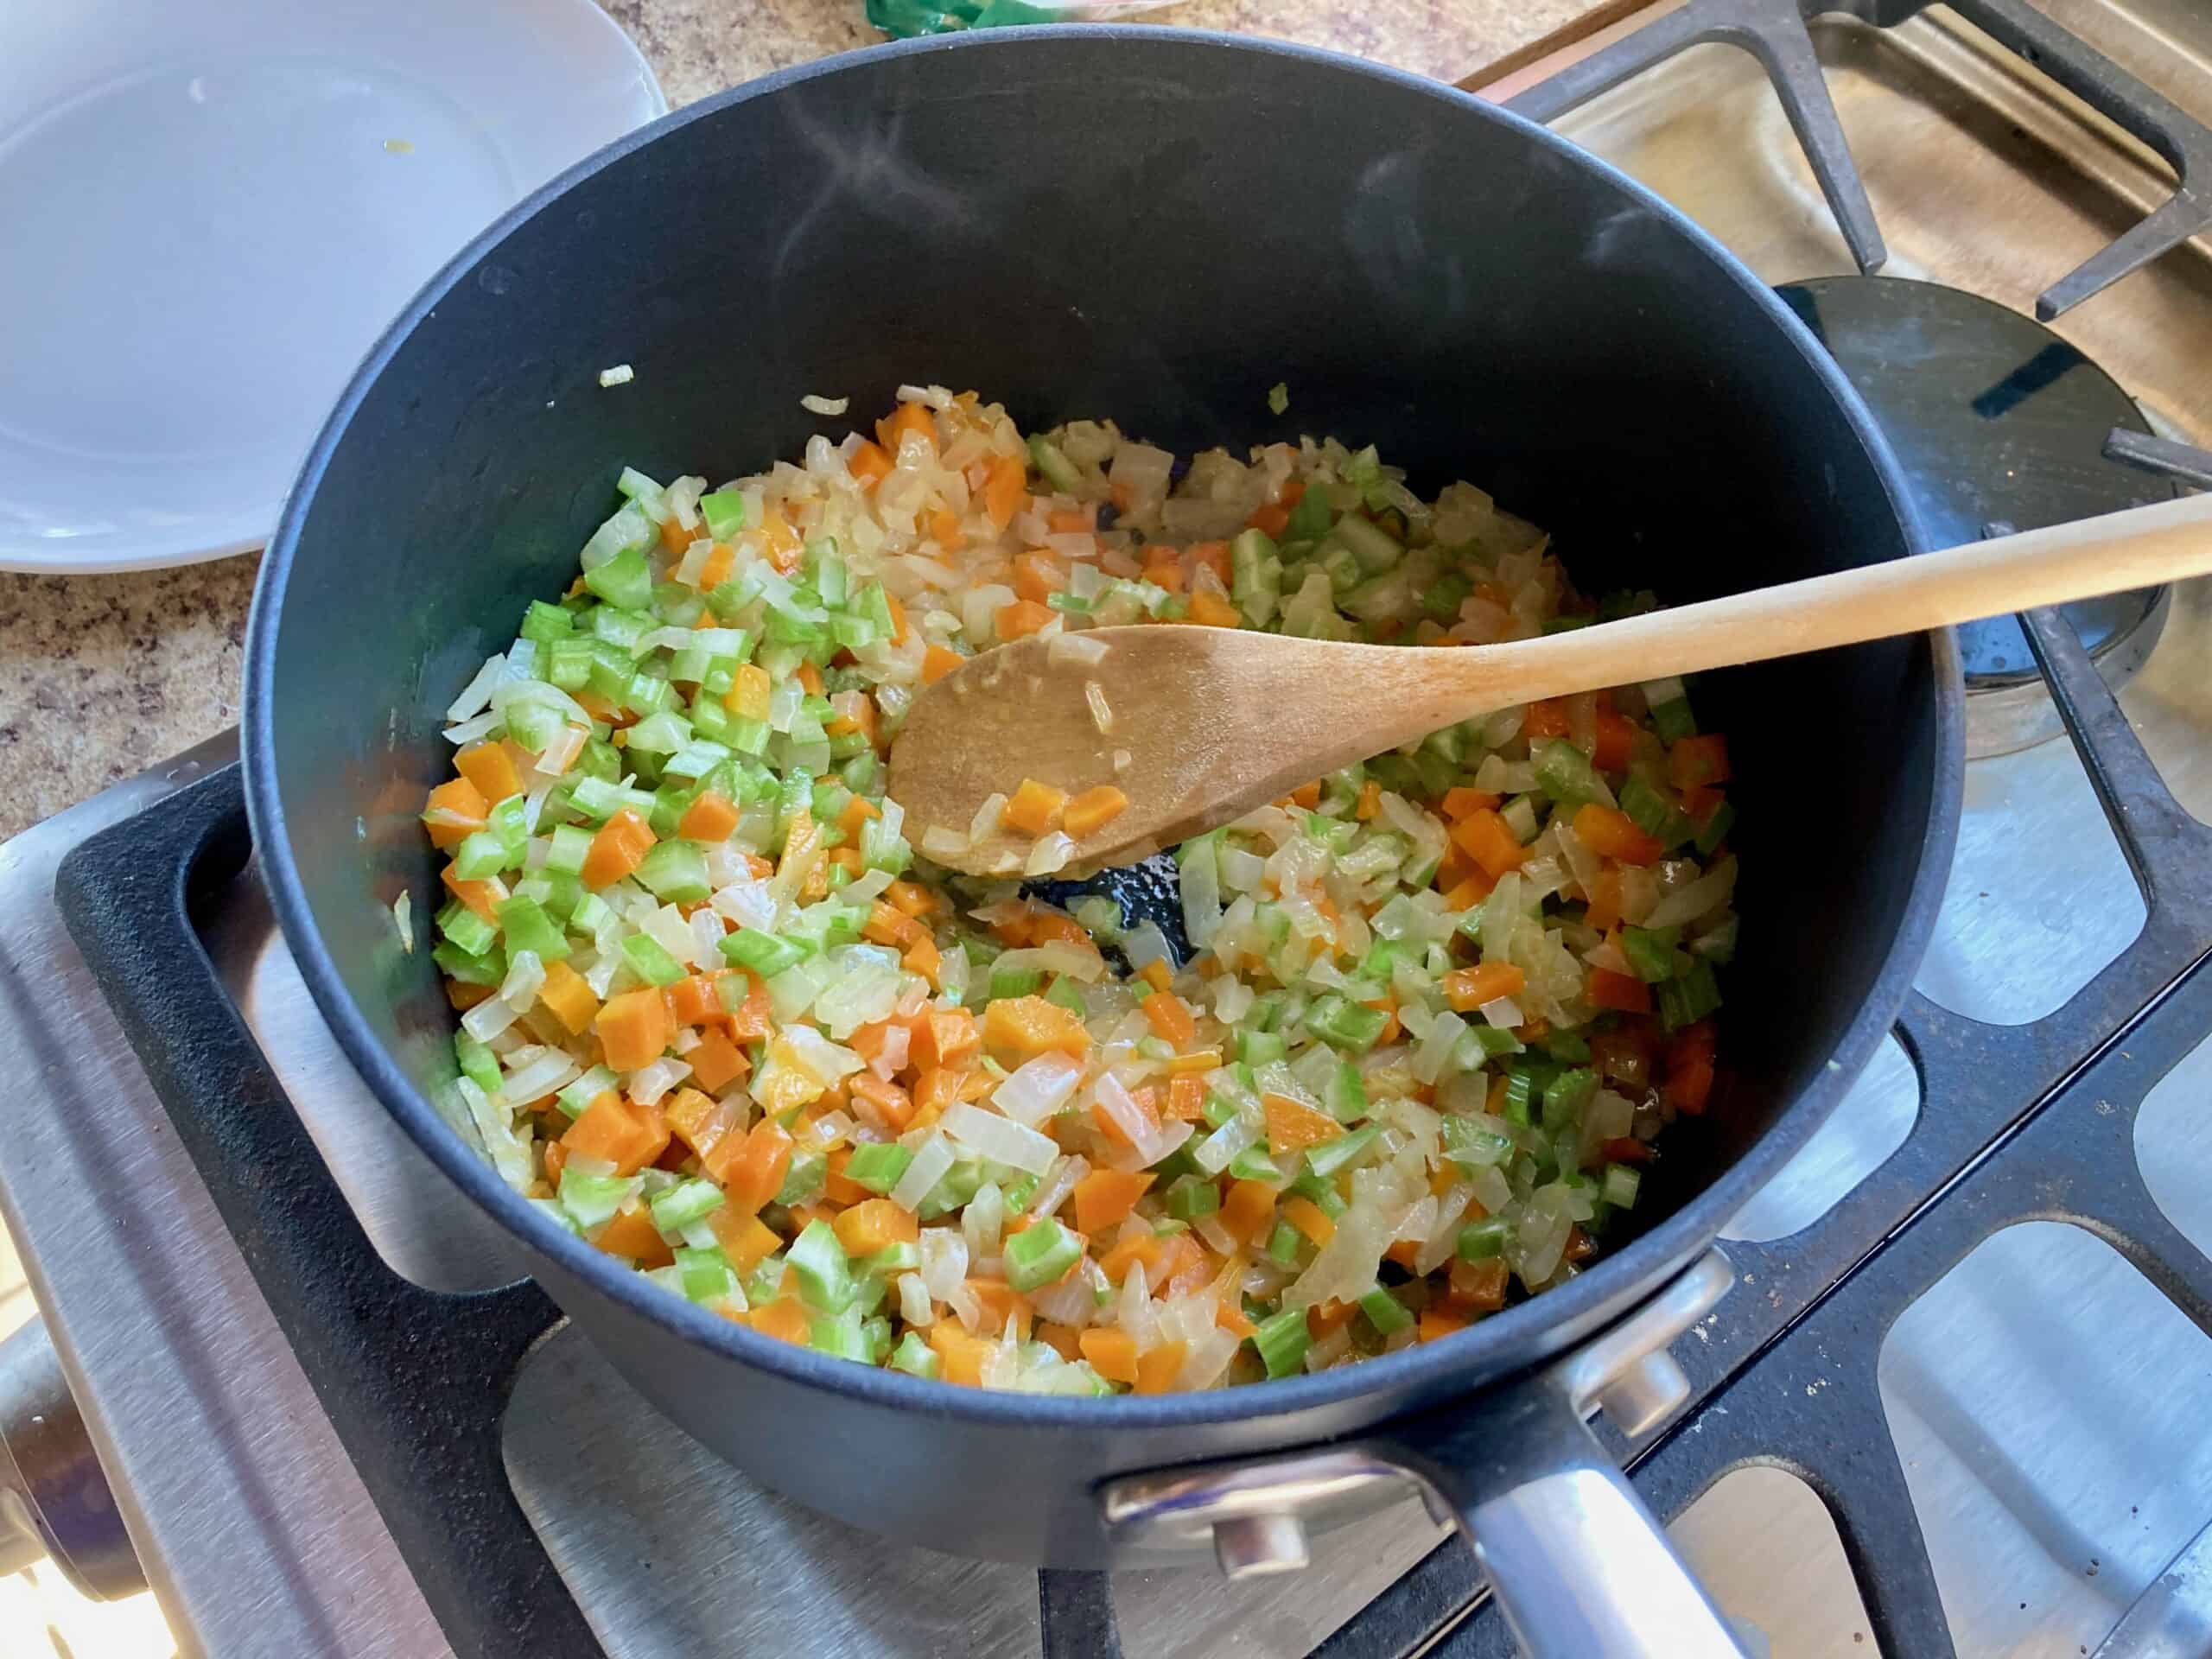 Diced carrot, celery, onion and garlic in a black saucepan on the stove with wooden spoon